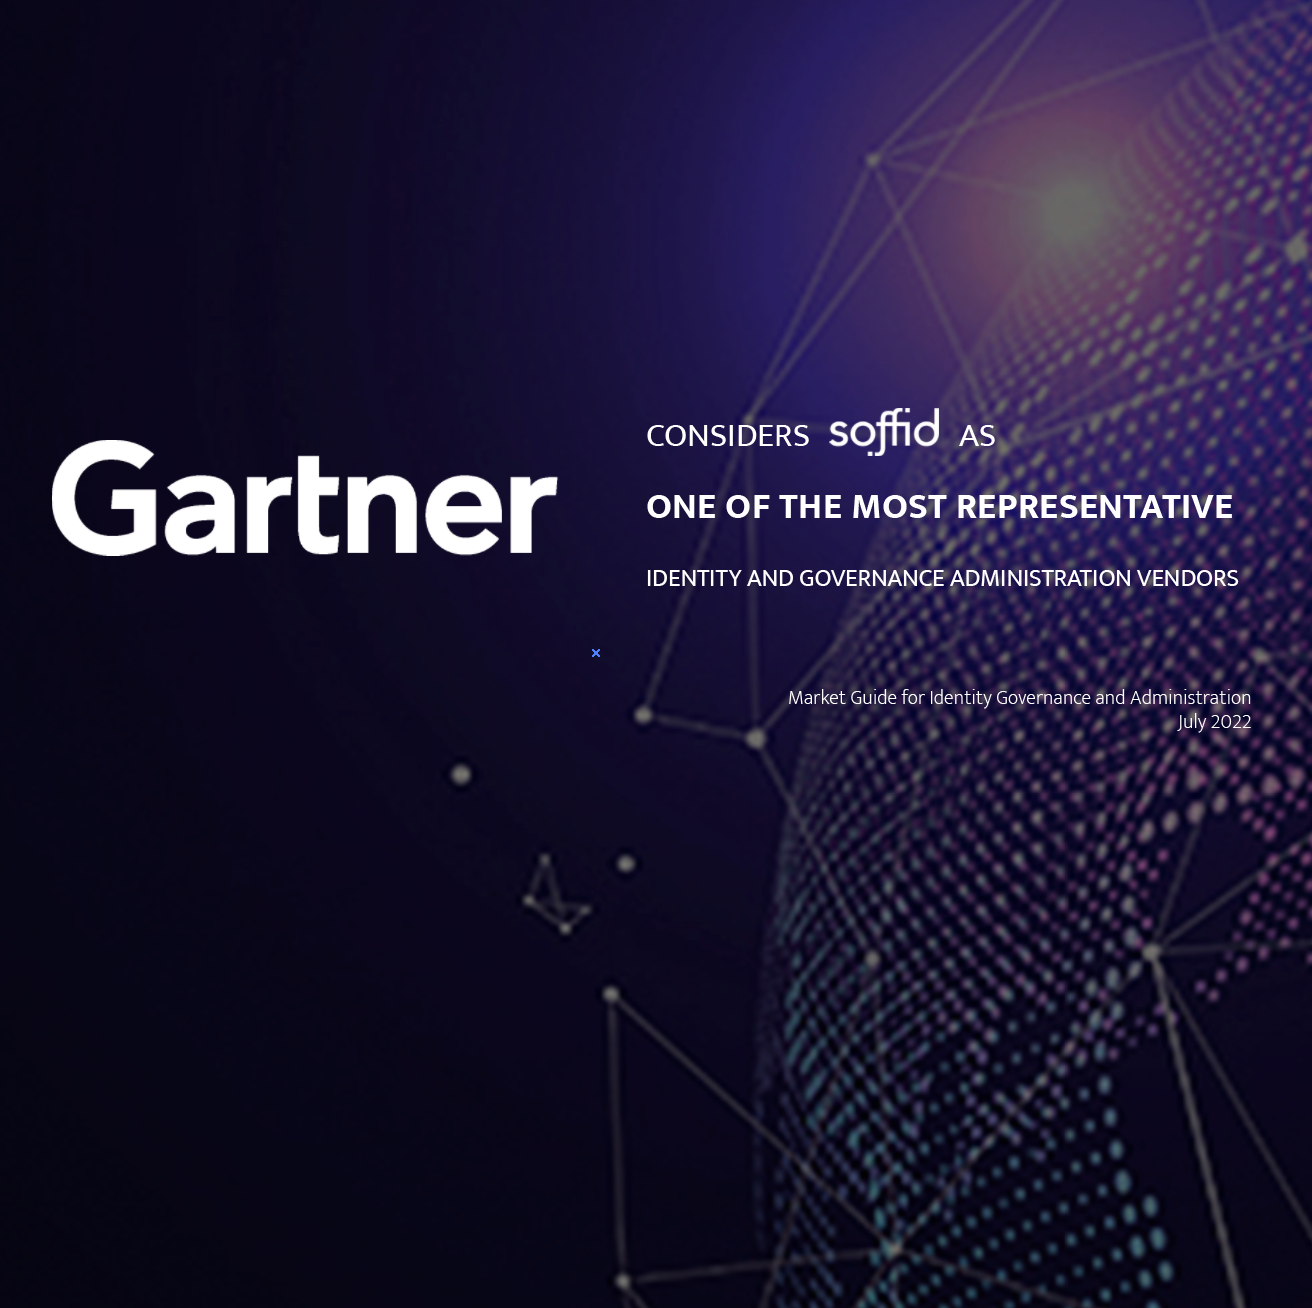 Soffid, one of the most representative Identity and Governance Administration vendor by Gartner